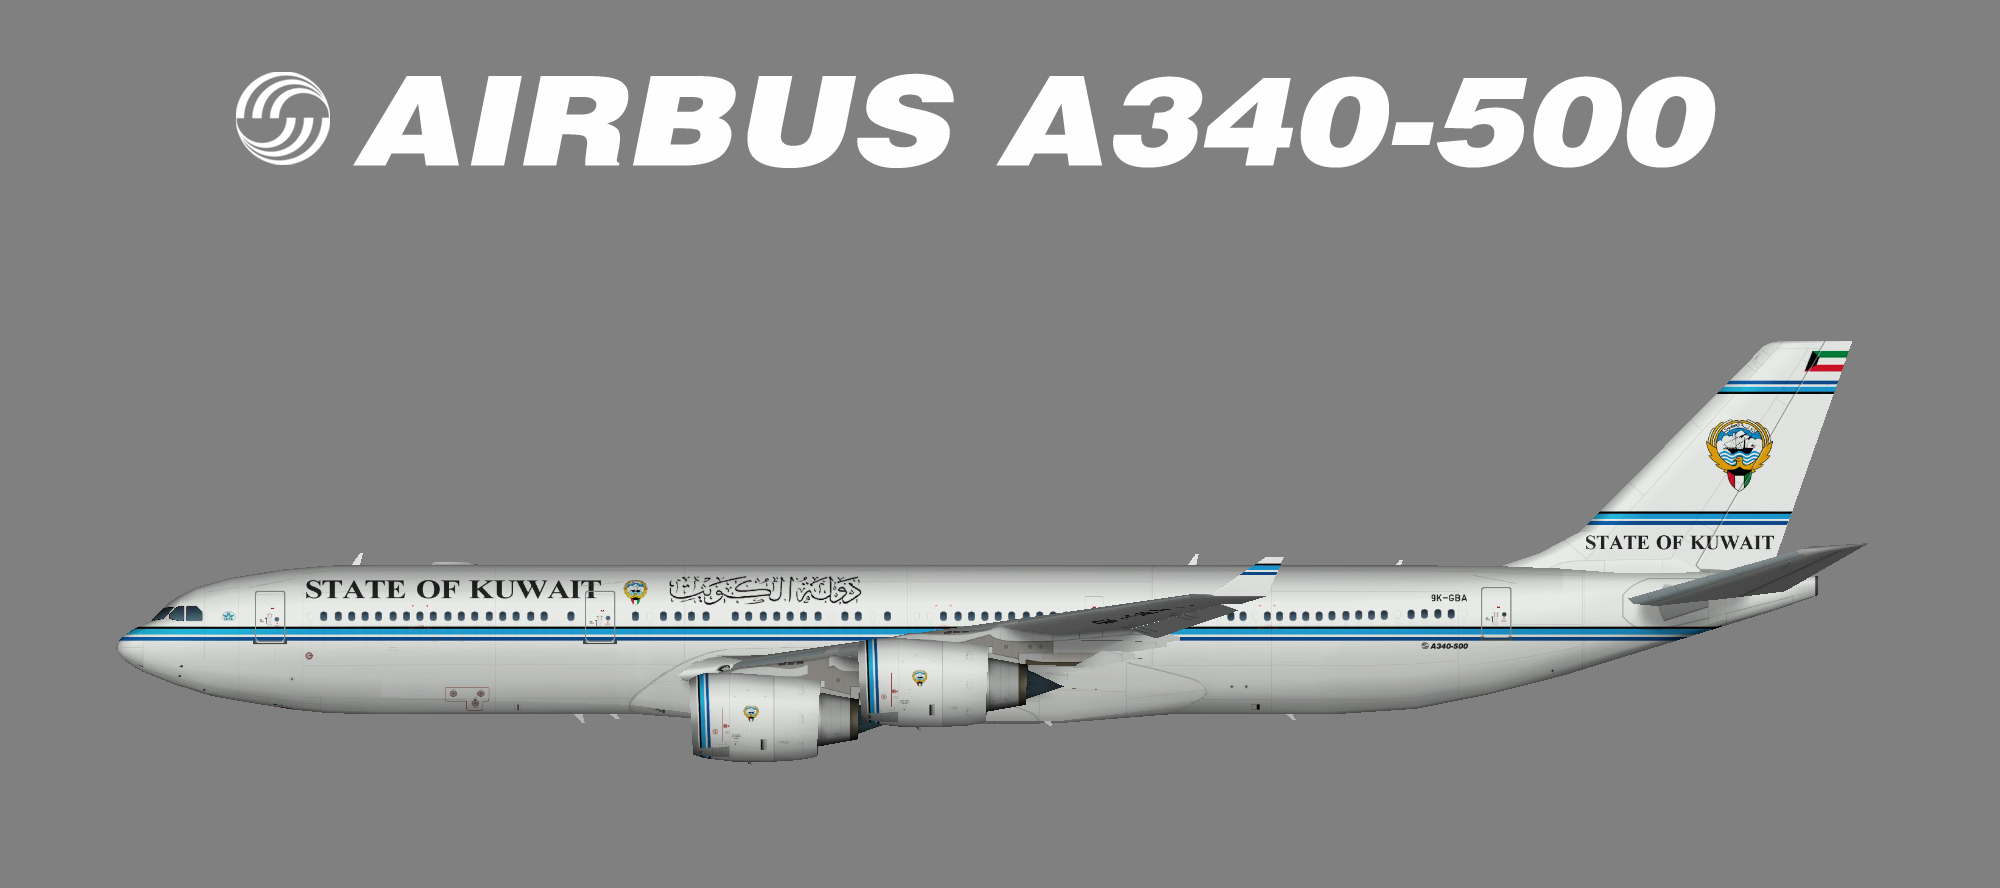 state-of-kuwait-a340-500